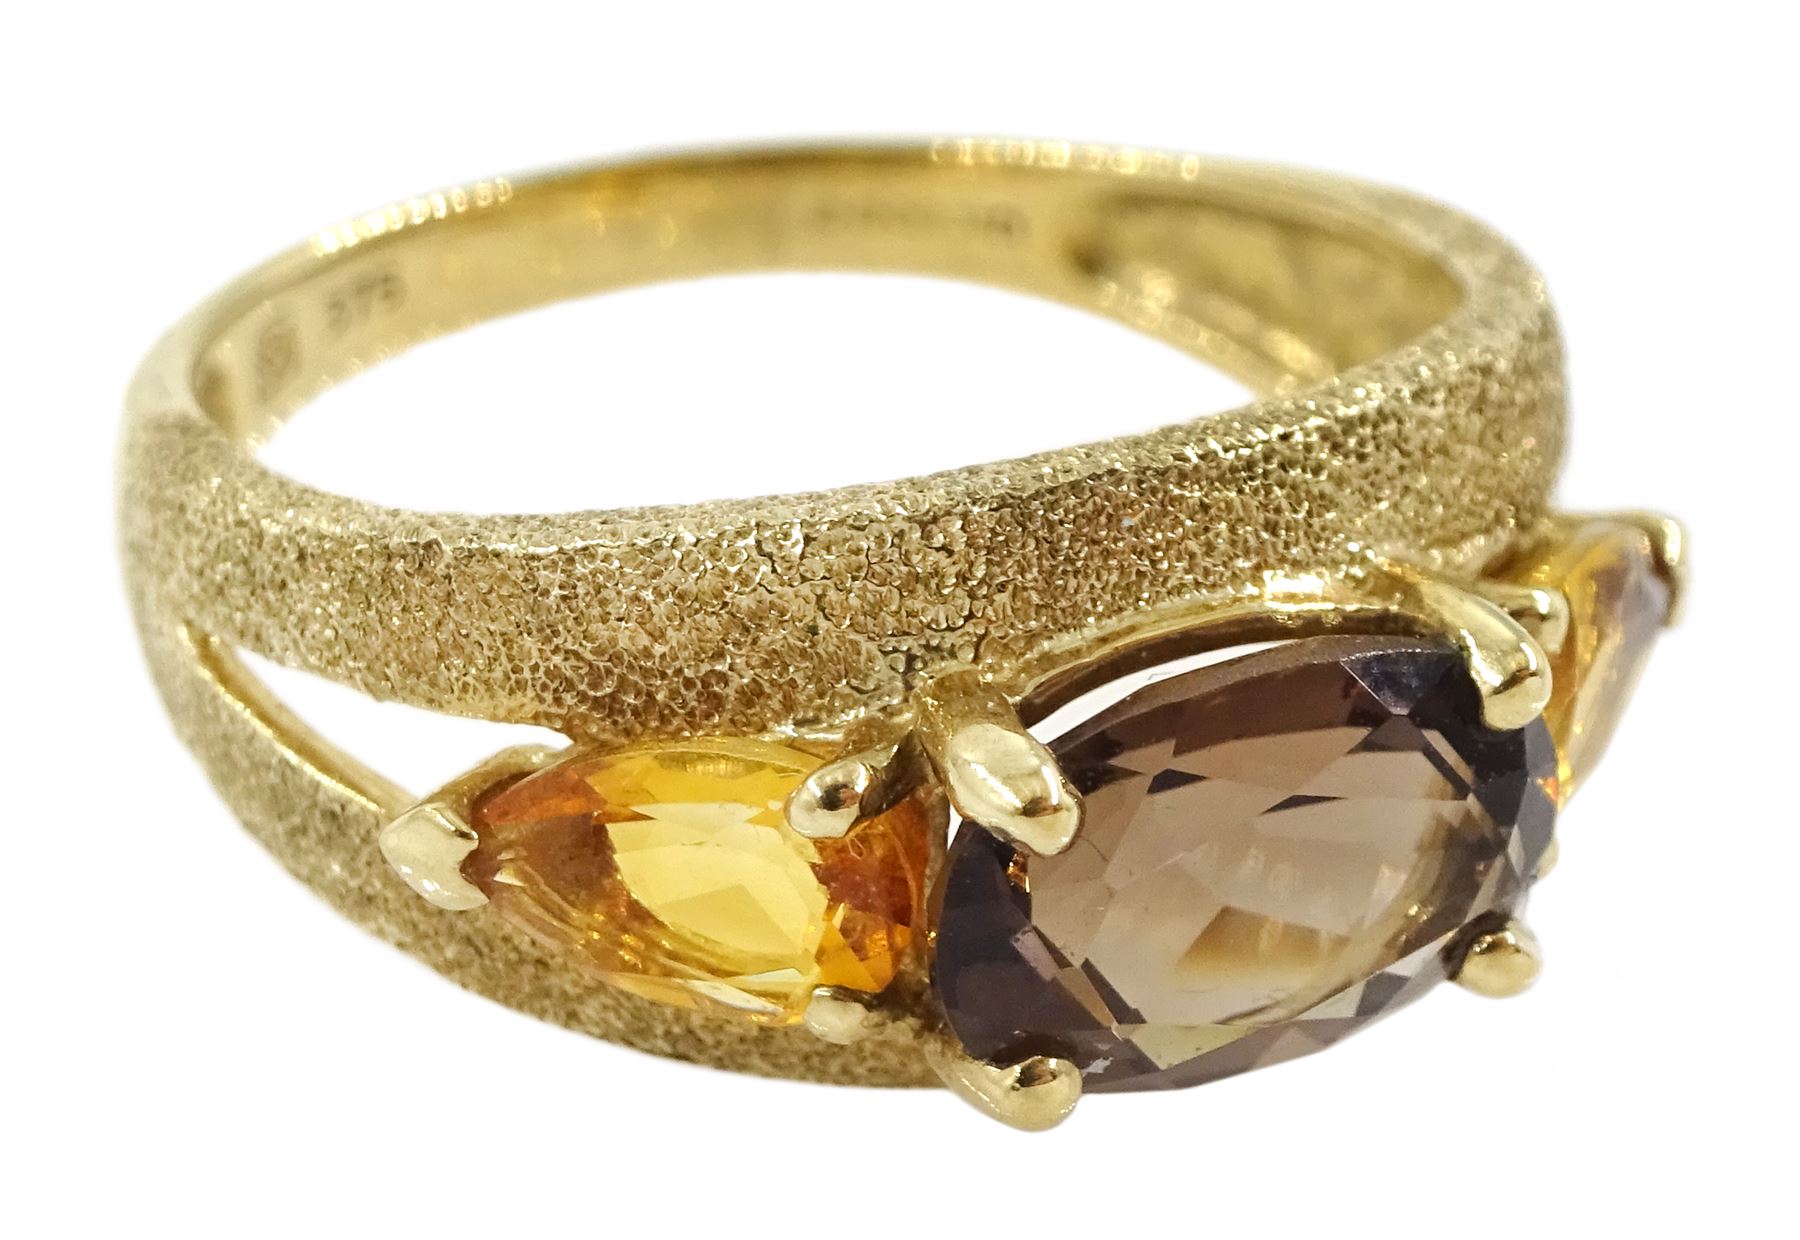 9ct gold three stone oval smoky quartz and pear shaped citrine ring - Image 3 of 4